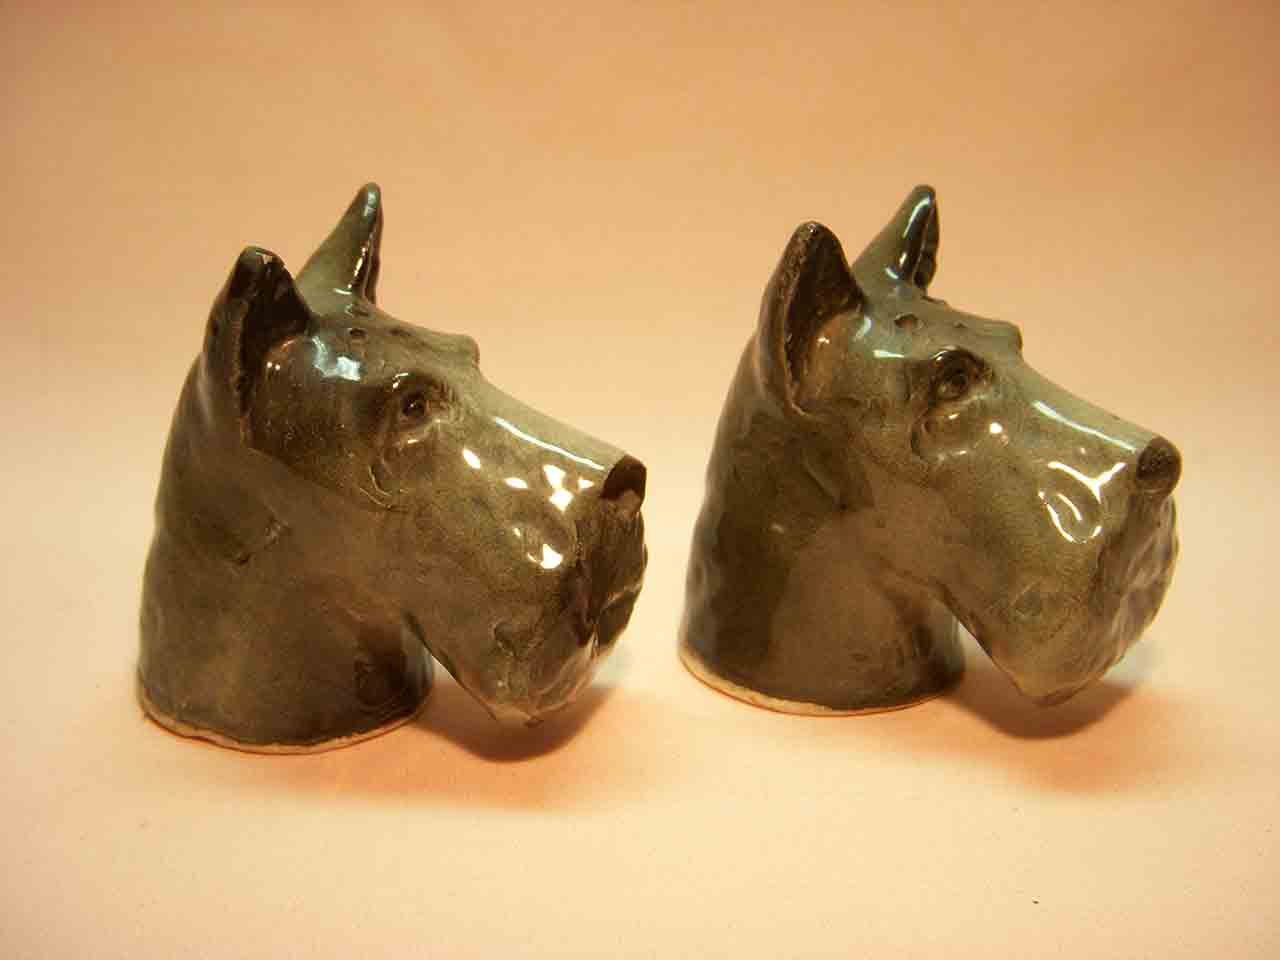 Japan realistic dog heads series of salt and pepper shakers - Schnauzers